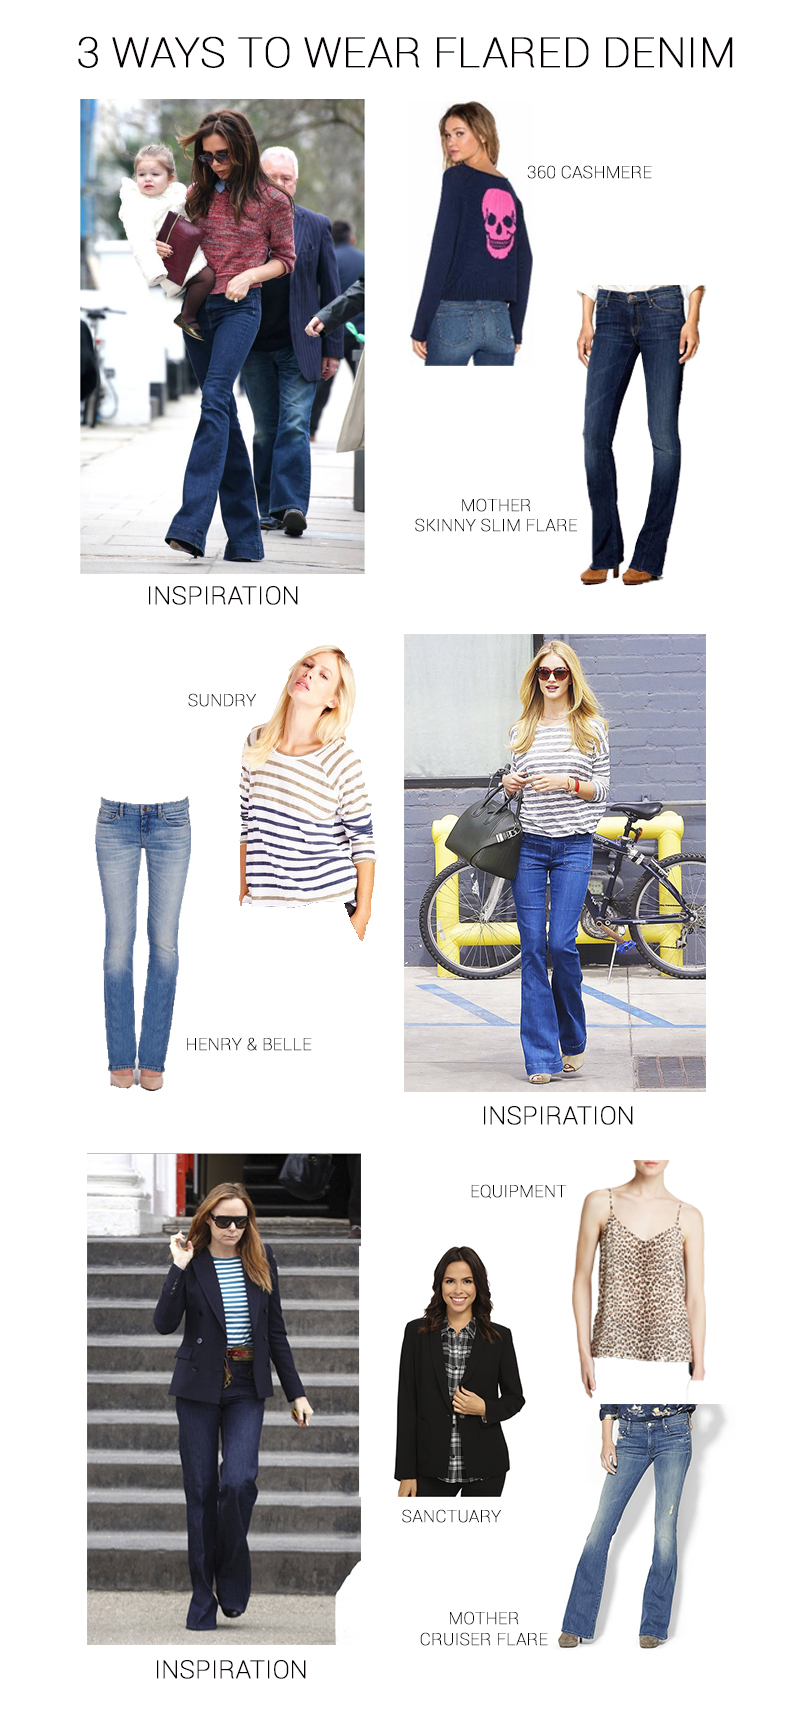 109 flare jeans